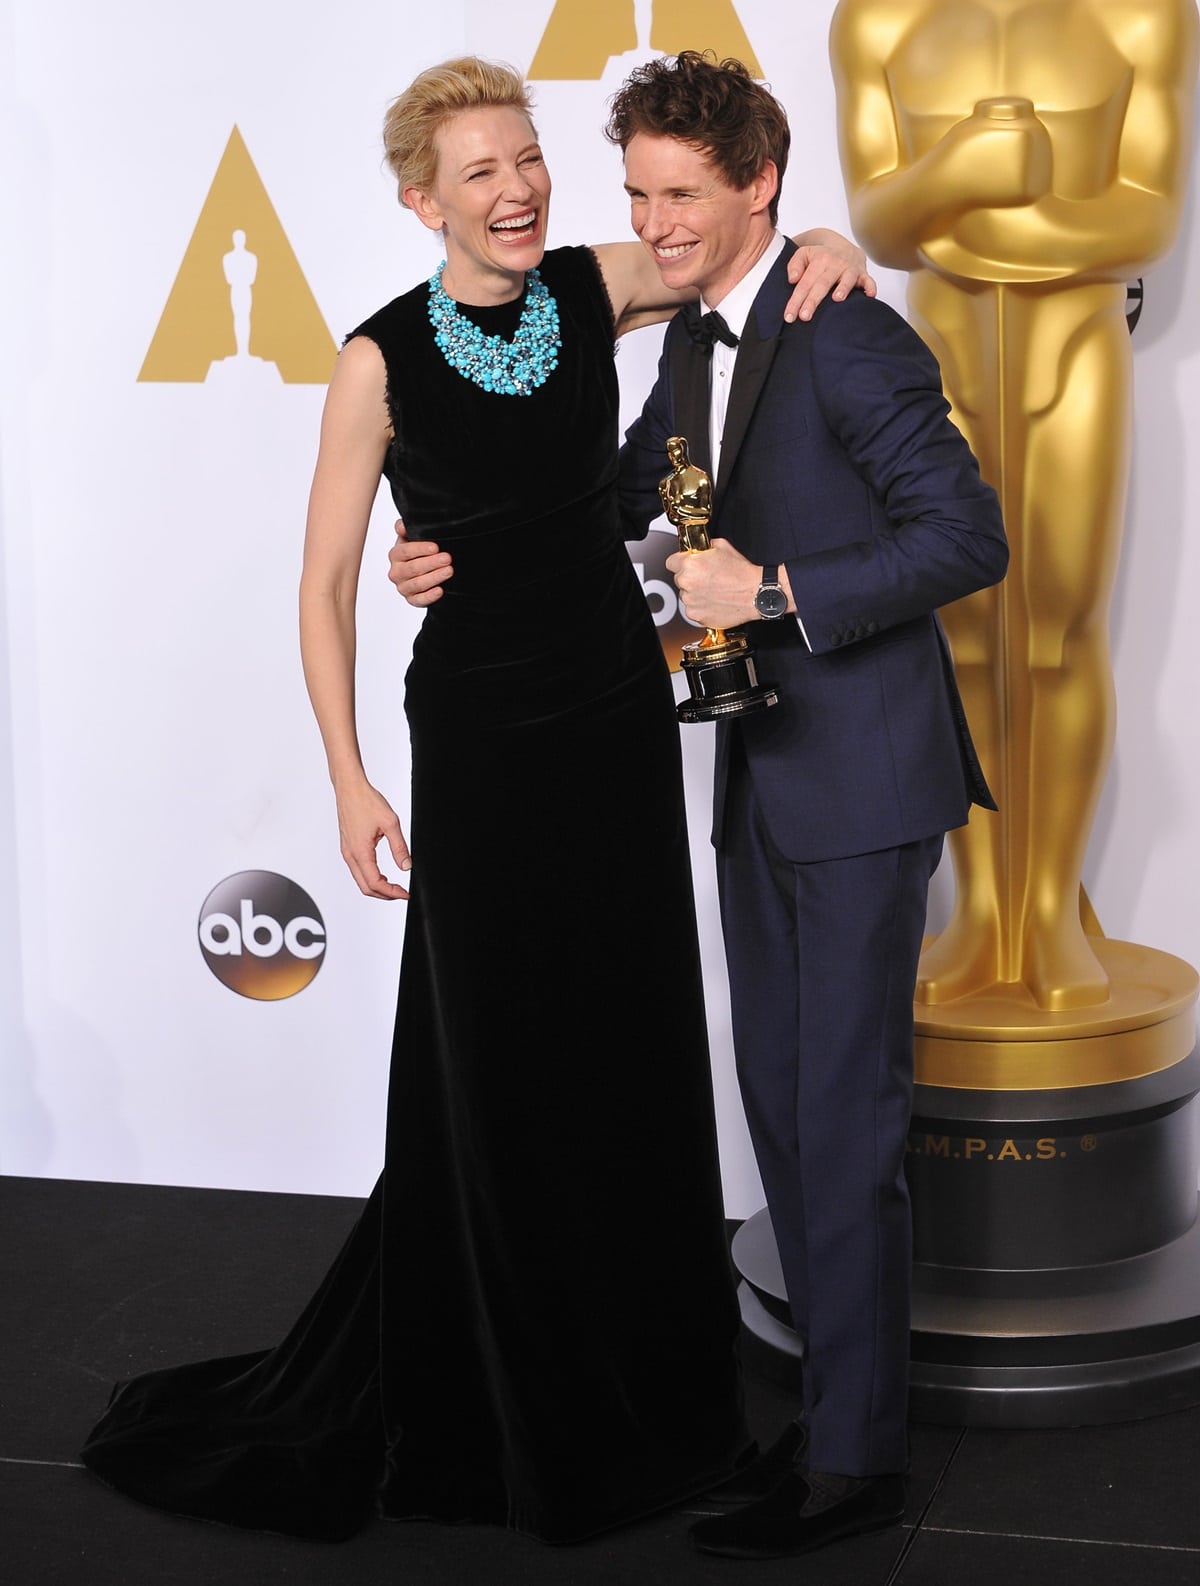 Cate Blanchett and Eddie Redmayne pose in the press room during the 87th Annual Academy Awards